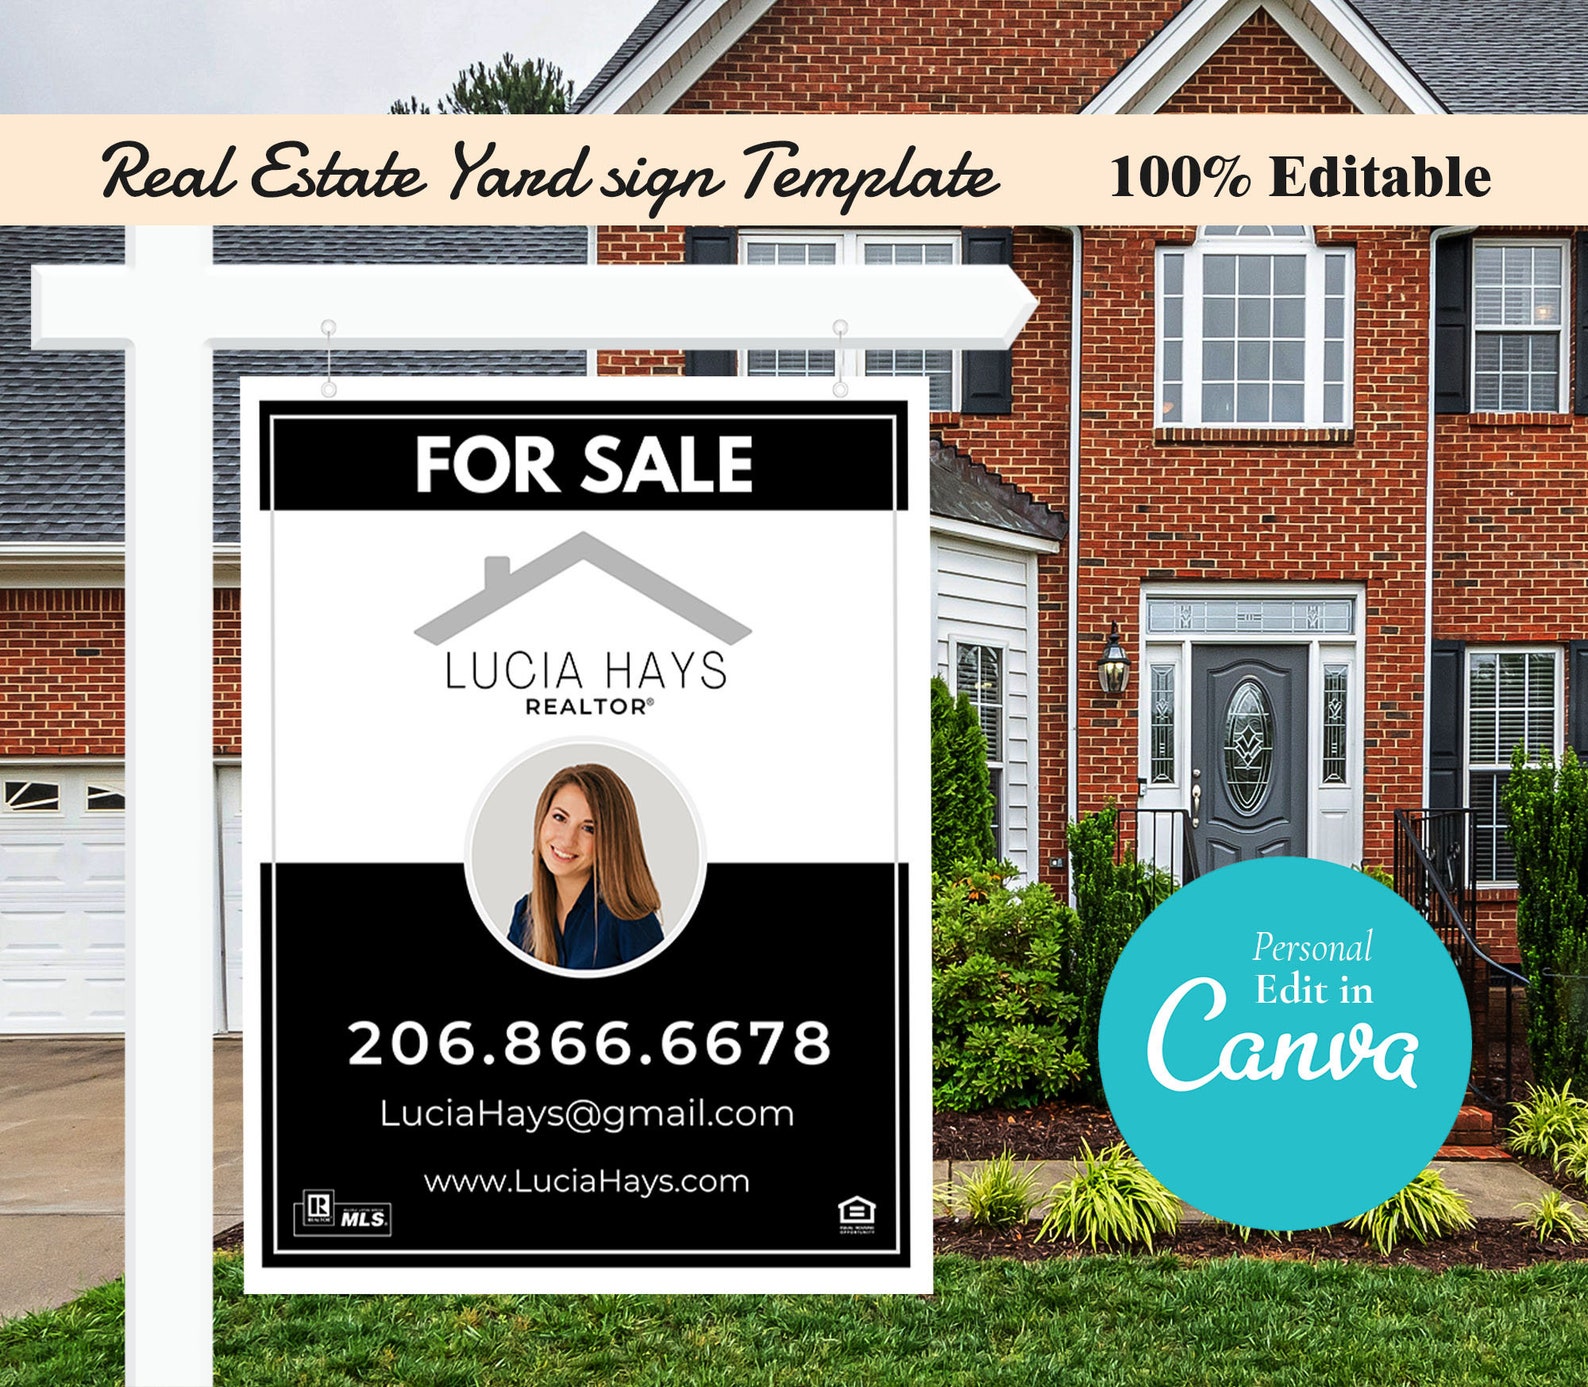 Real Estate Yard Sign Template 18x24 Canva for Sale Sign Etsy